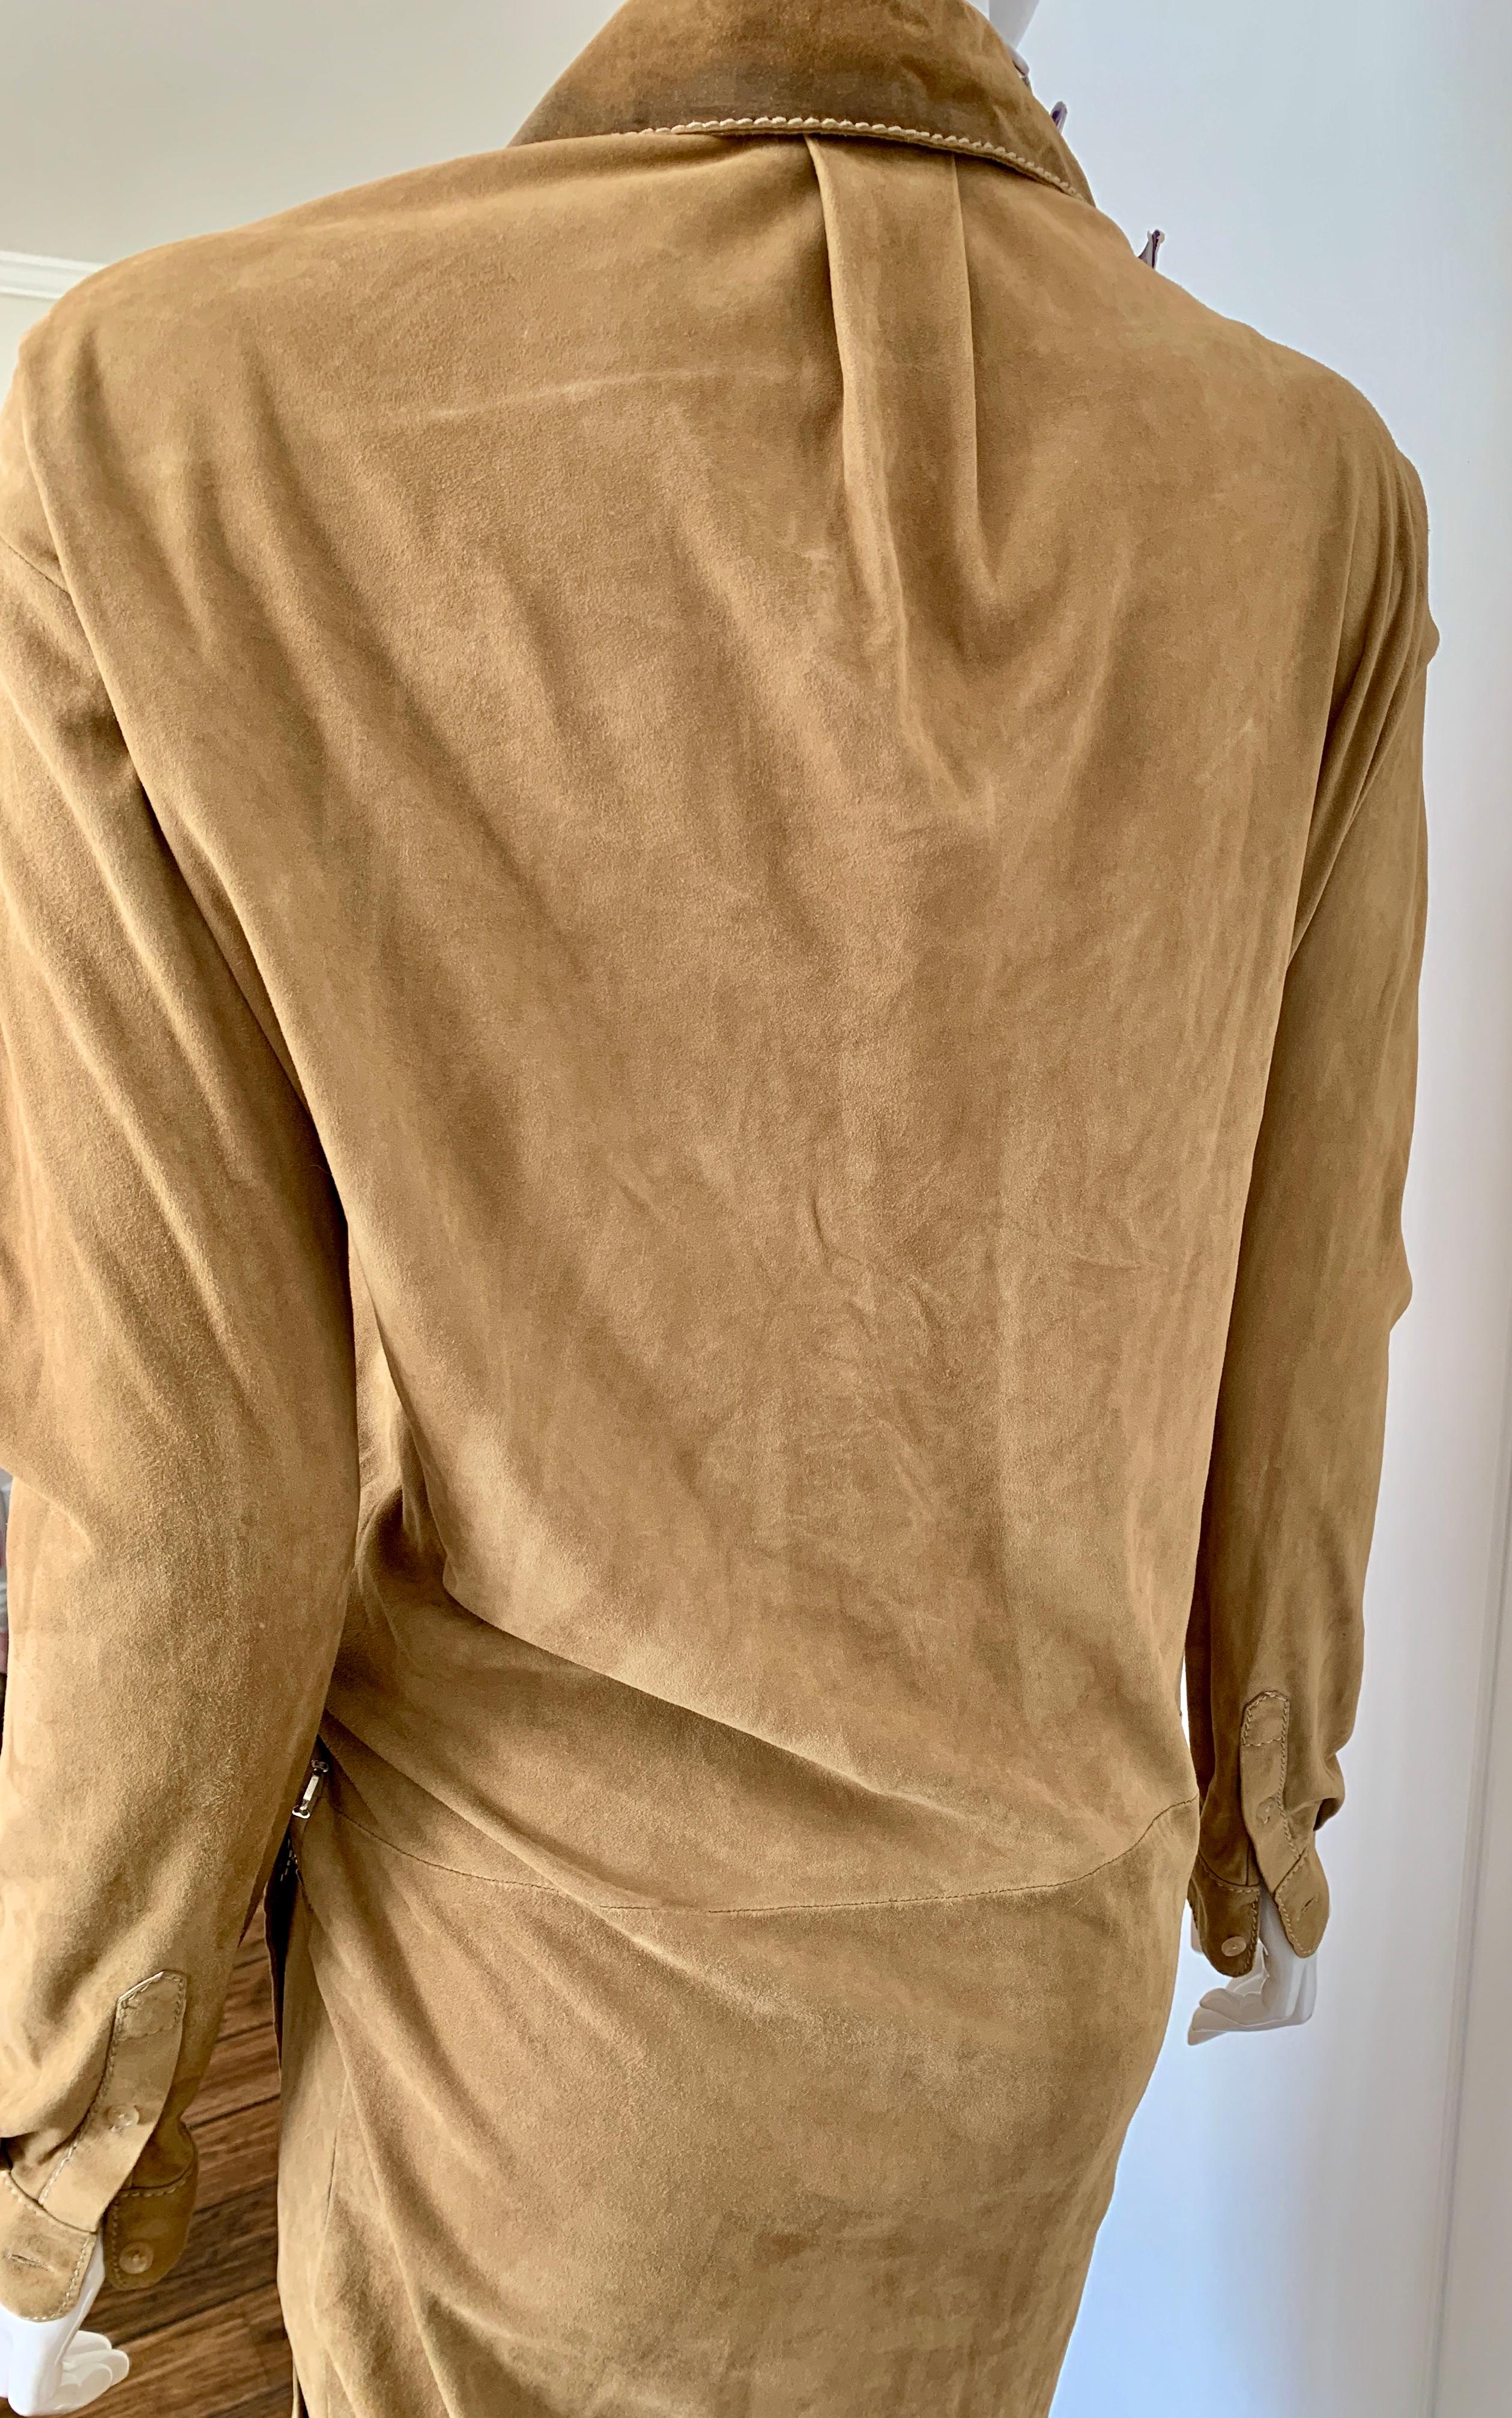 Ralph Lauren Suede Tan Wrap Dress Size 6 In Good Condition For Sale In Thousand Oaks, CA